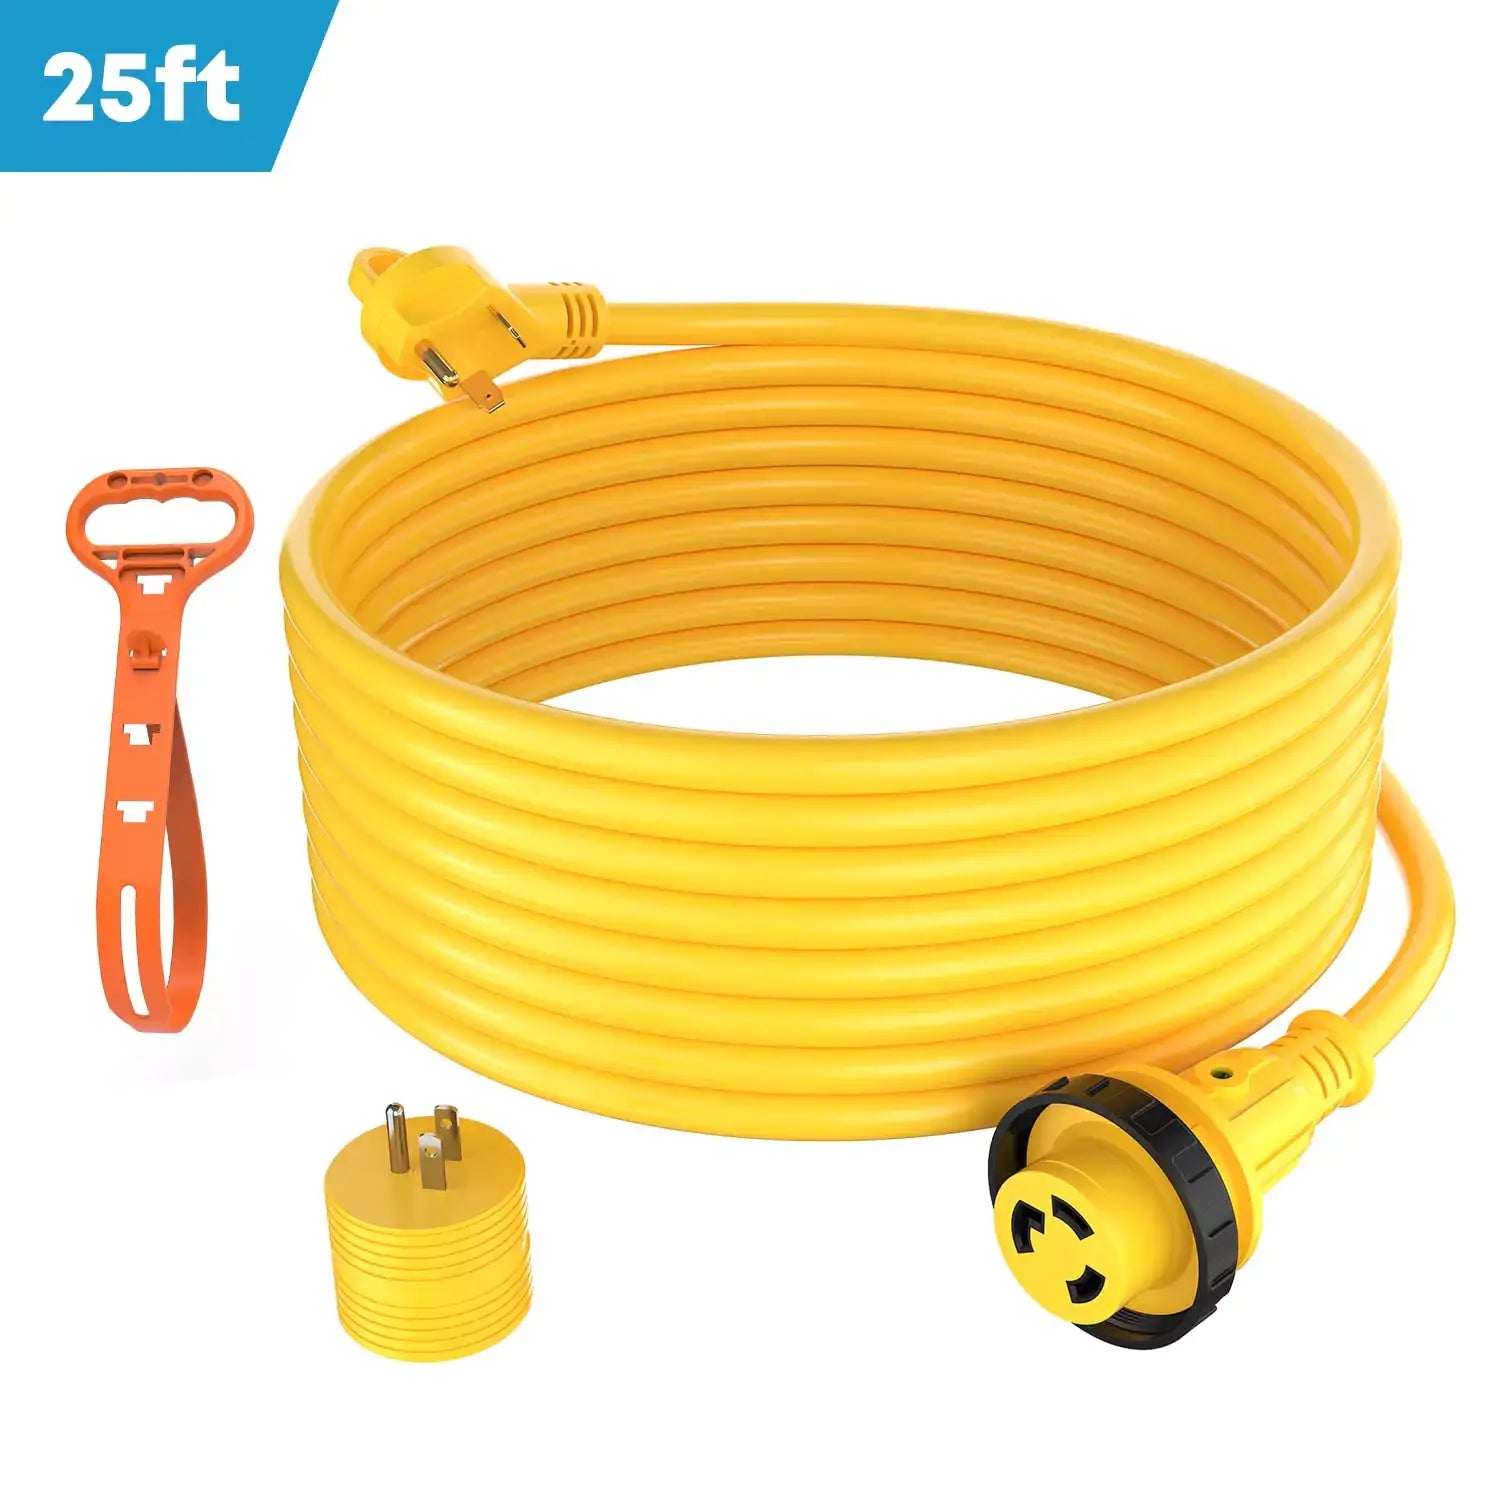 25 feet heavy duty extension cord for RV and camper